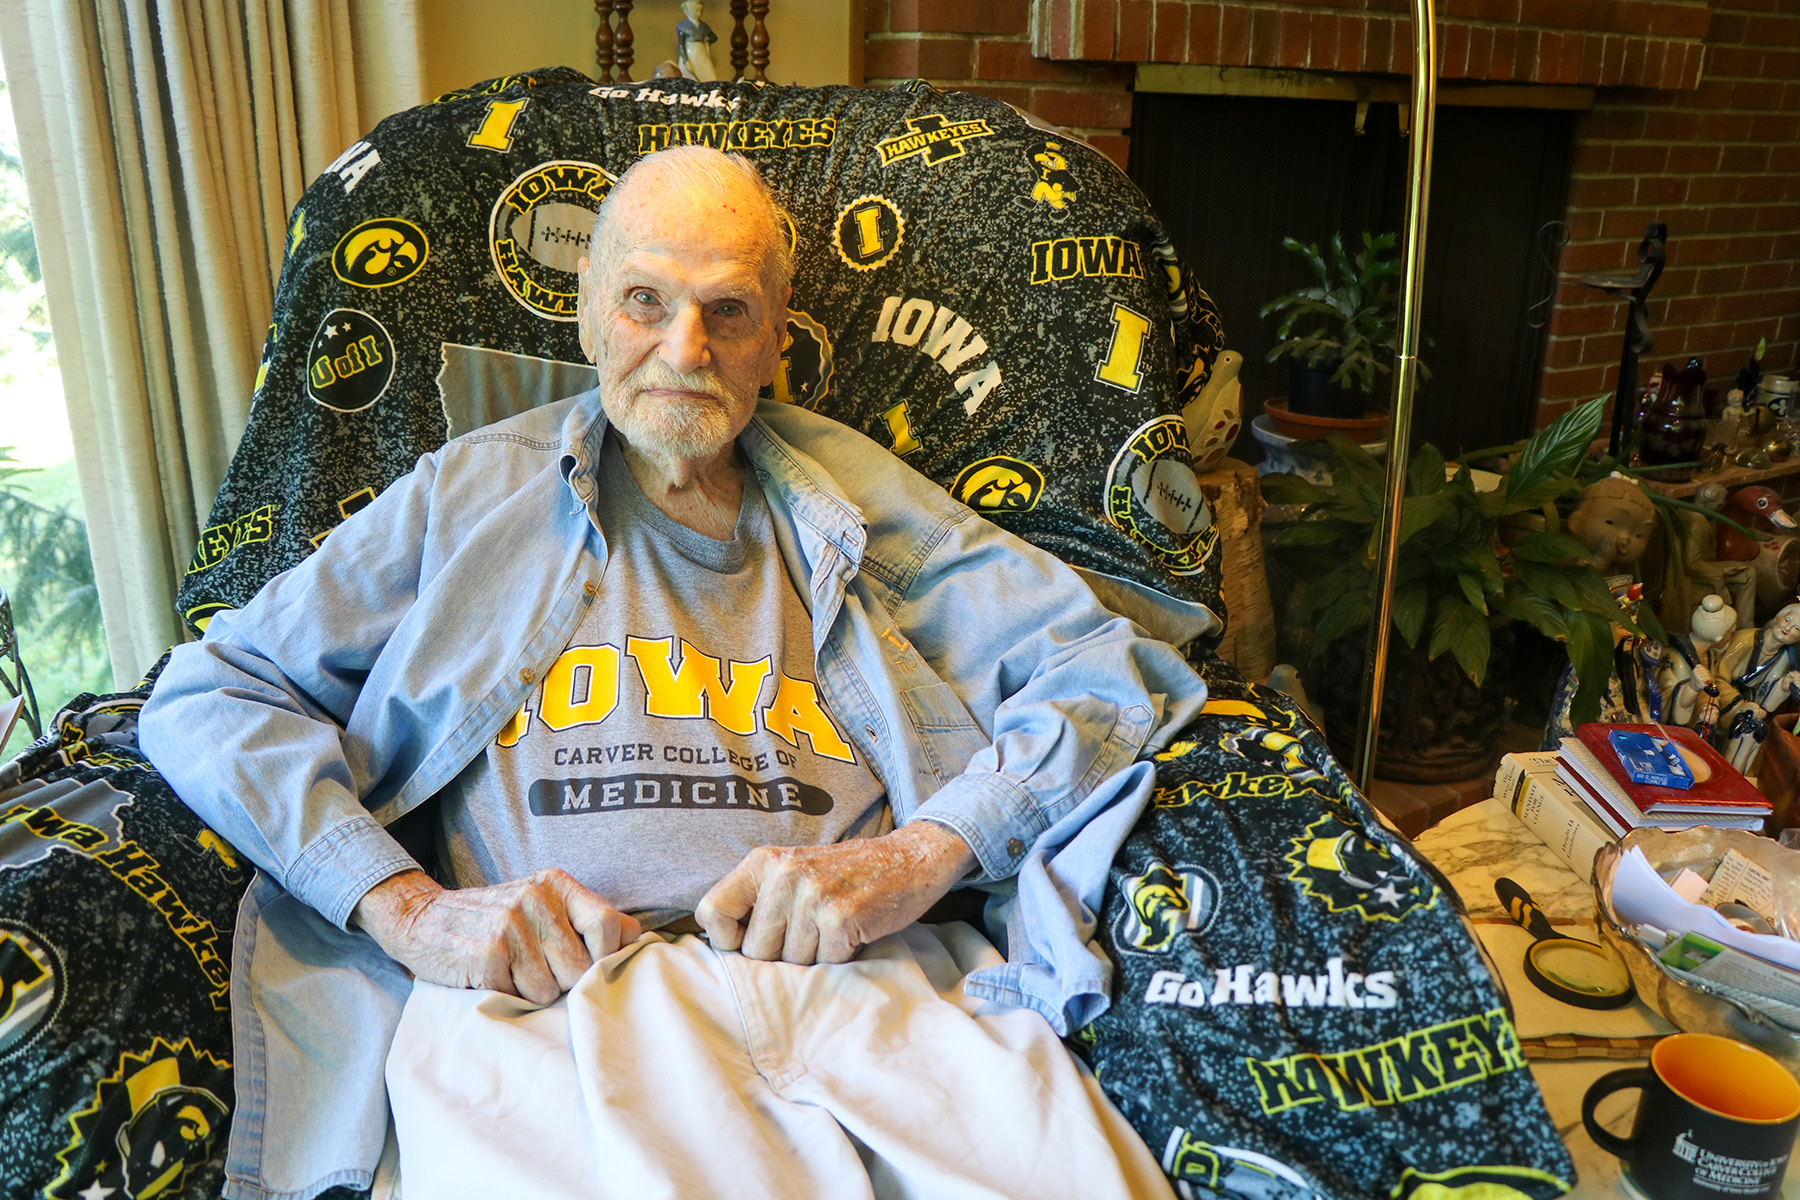 university of iowa carver college of medicine alum rufus kruse sitting in his home wearing an alum t-shirt